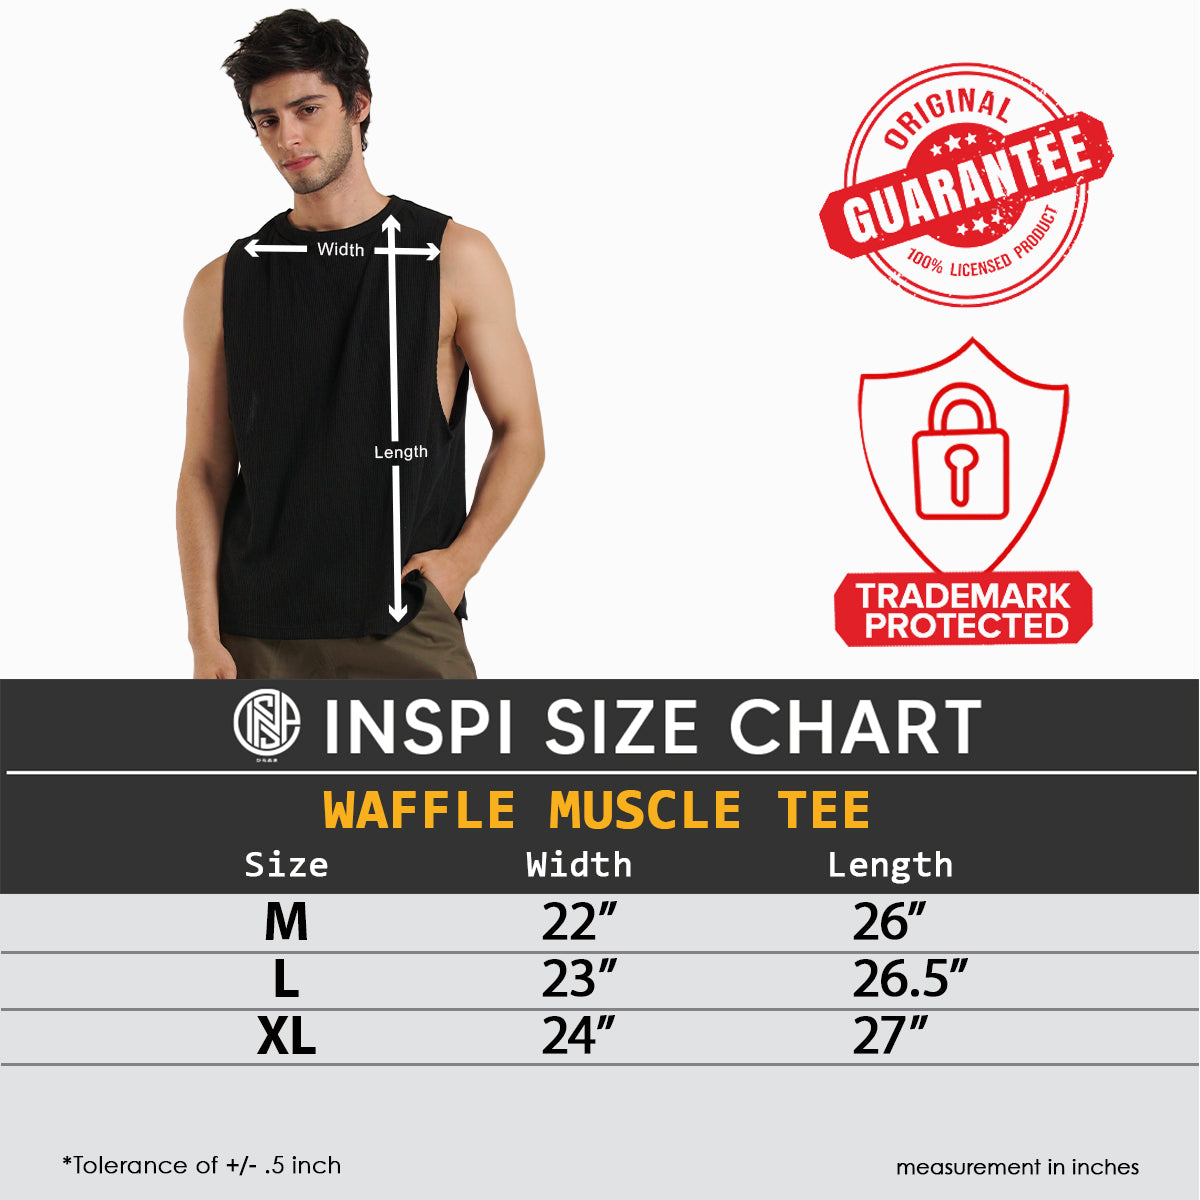 INSPI Waffle Muscle Tee Dark Gray Sando for Men Plain Sleeveless Tank Top Gym Workout Exercise Beach Outfit